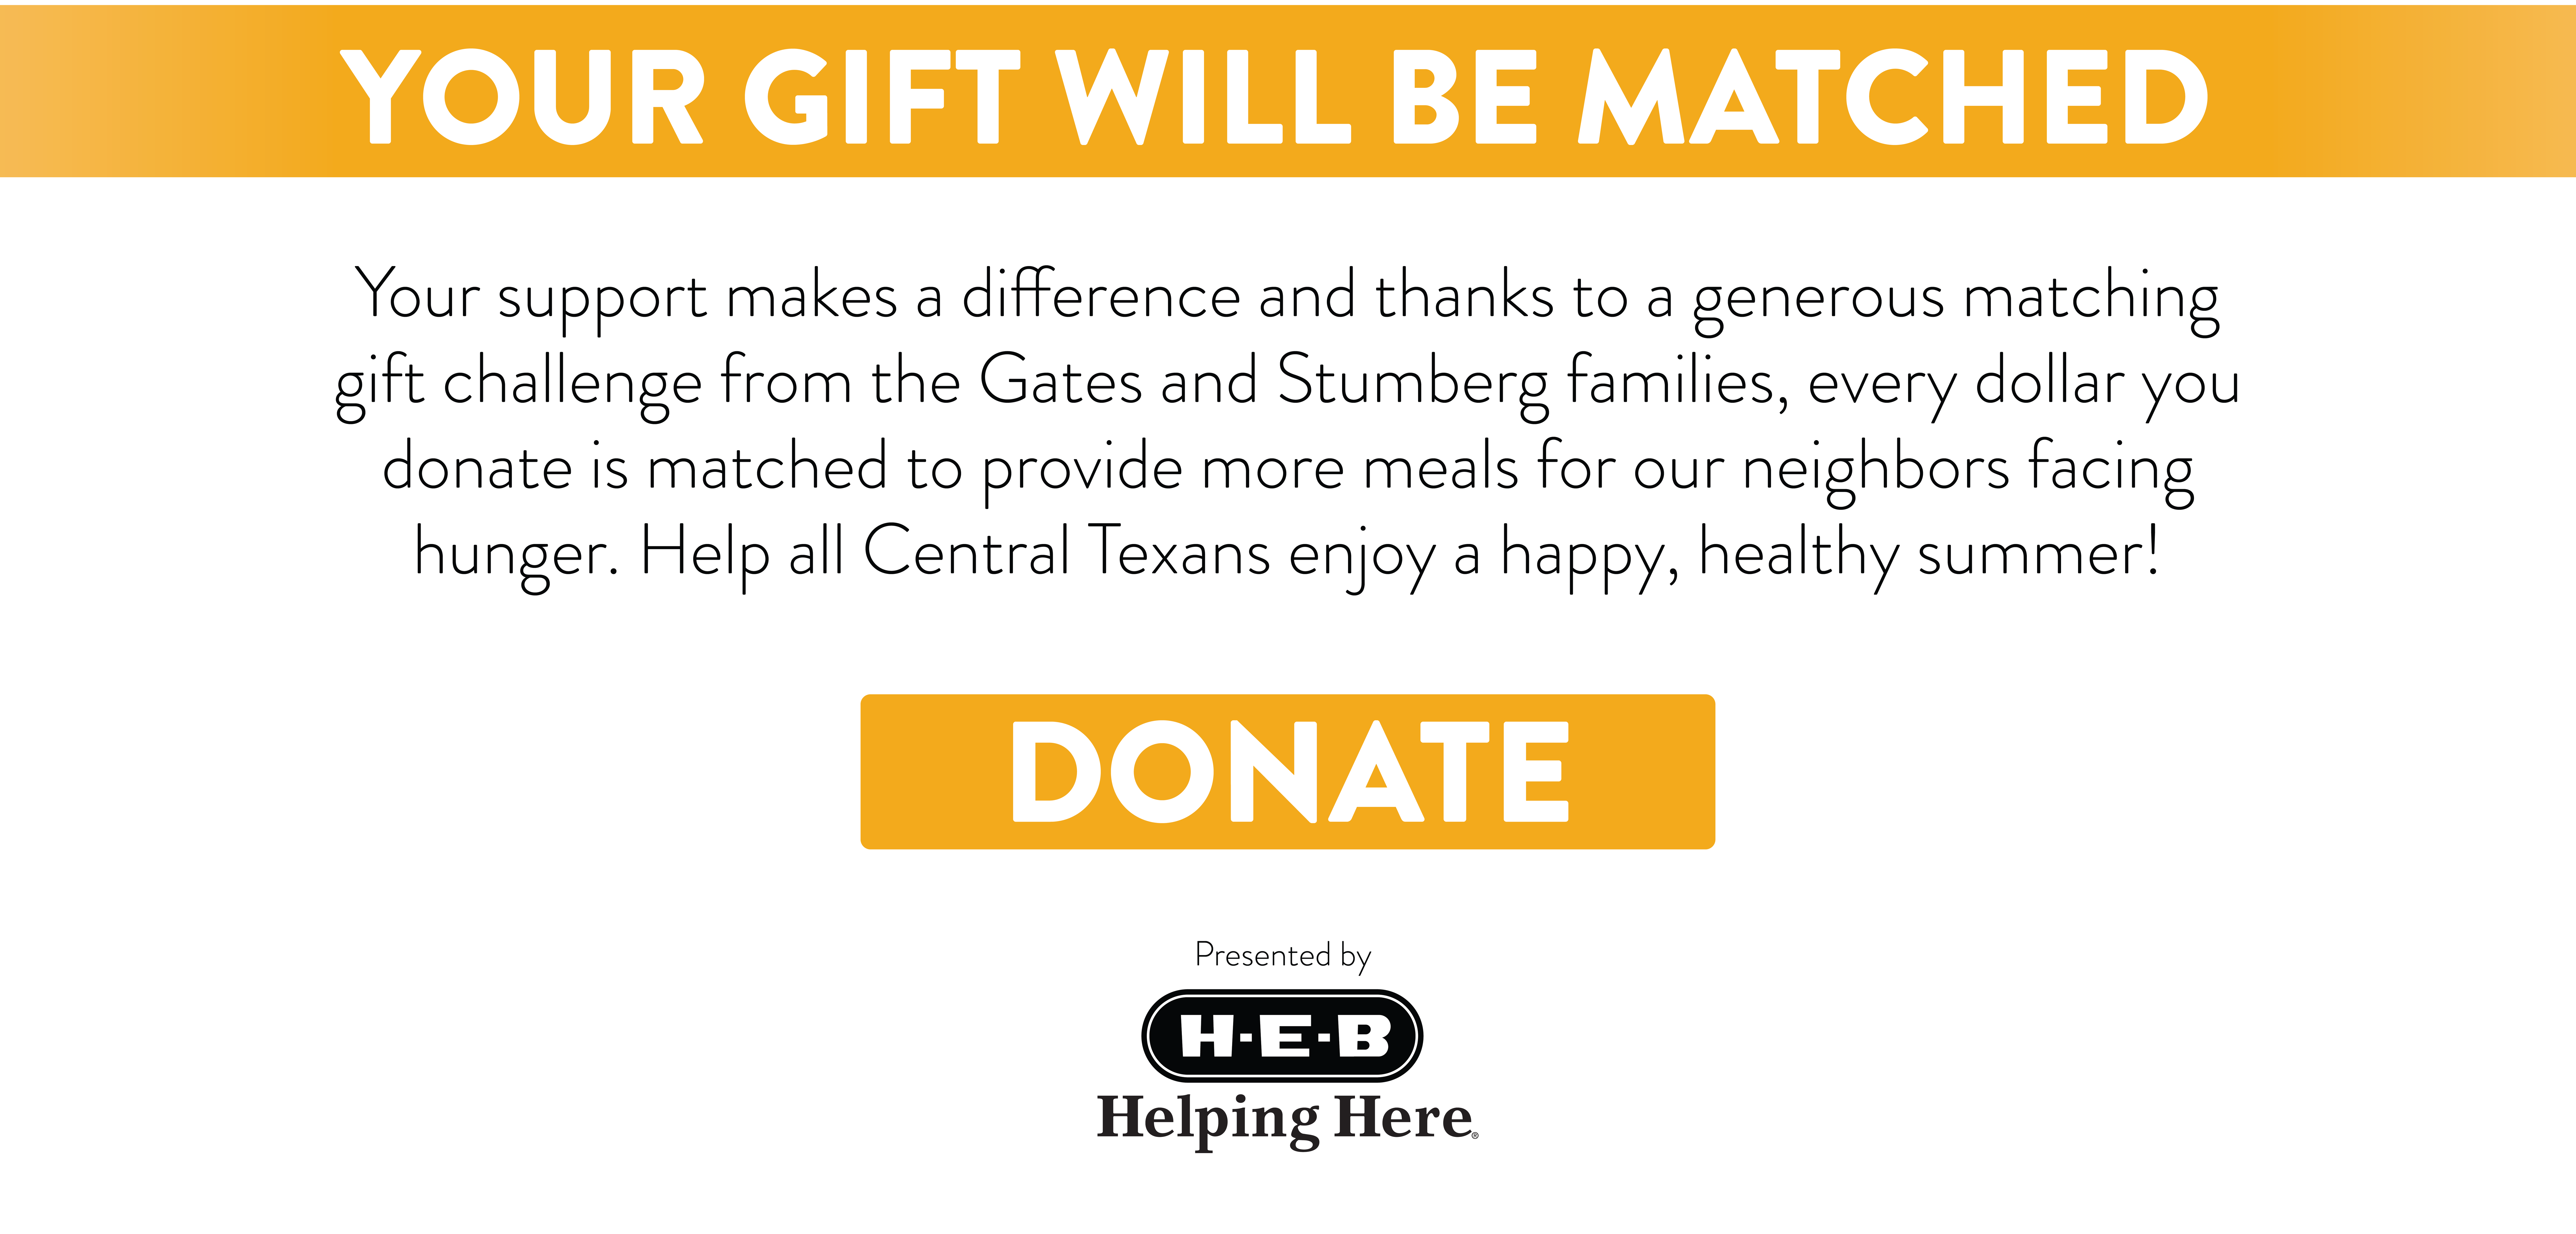 Your gift today is matched!